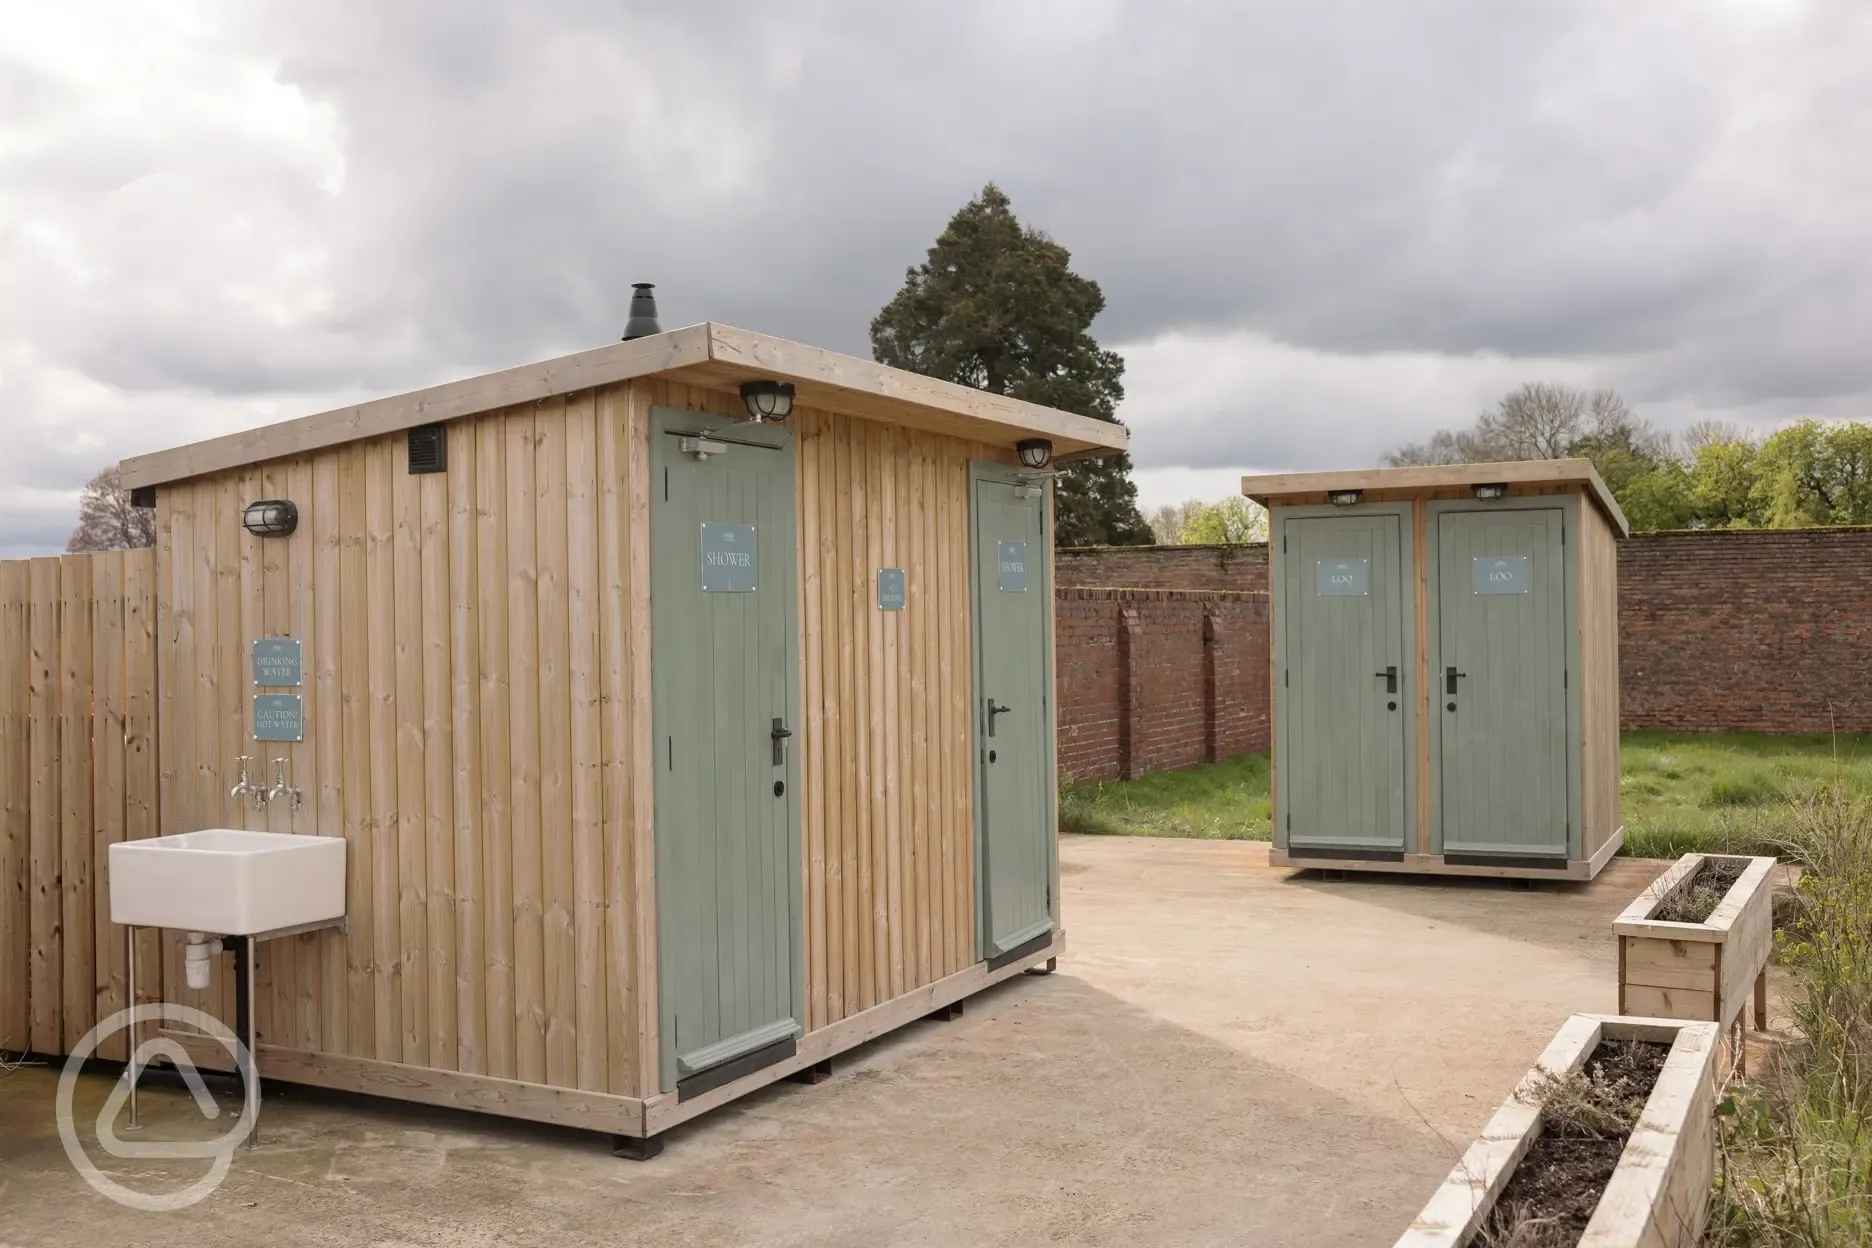 Toilet and shower block with flushing toilets, hot showers and hairdryers